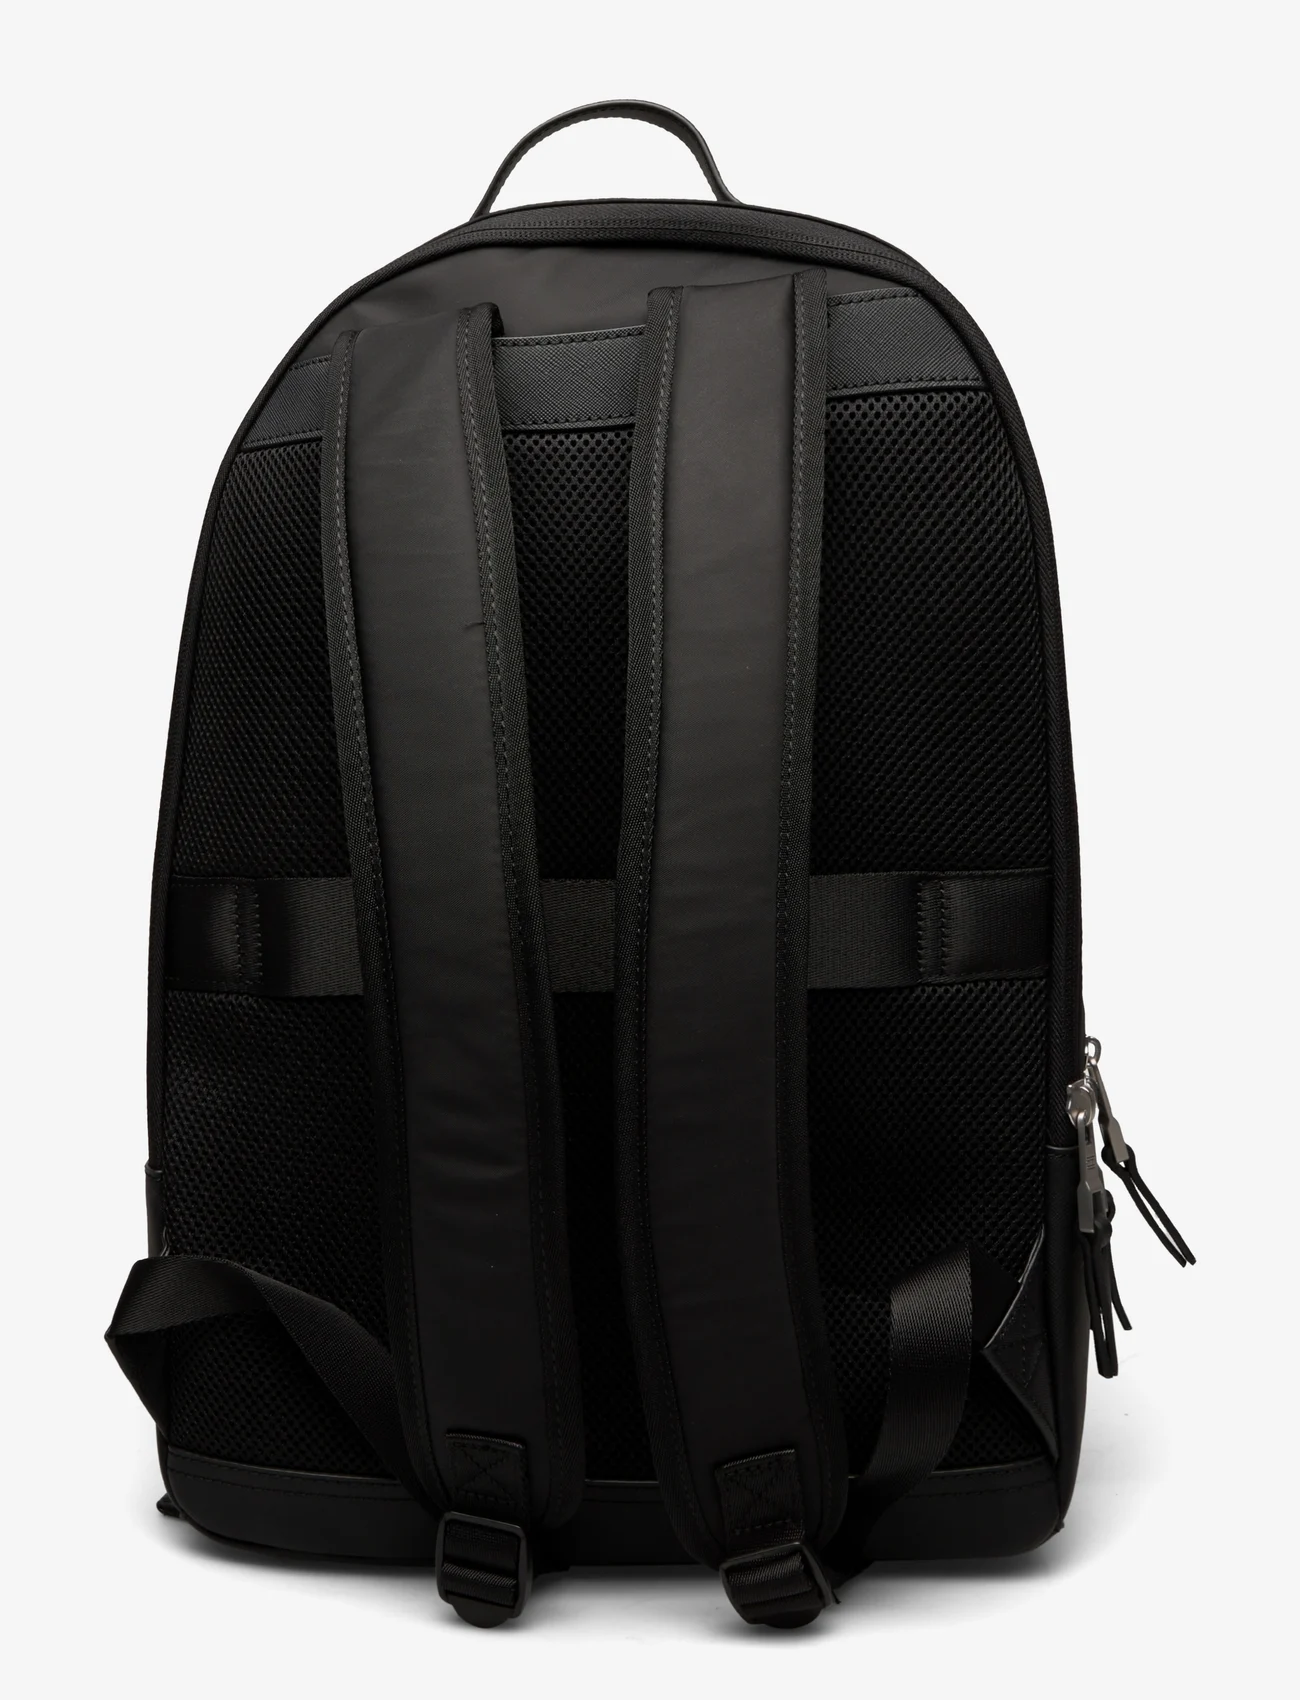 Tommy Hilfiger - TH ELEVATED NYLON BACKPACK - reput - black - 1